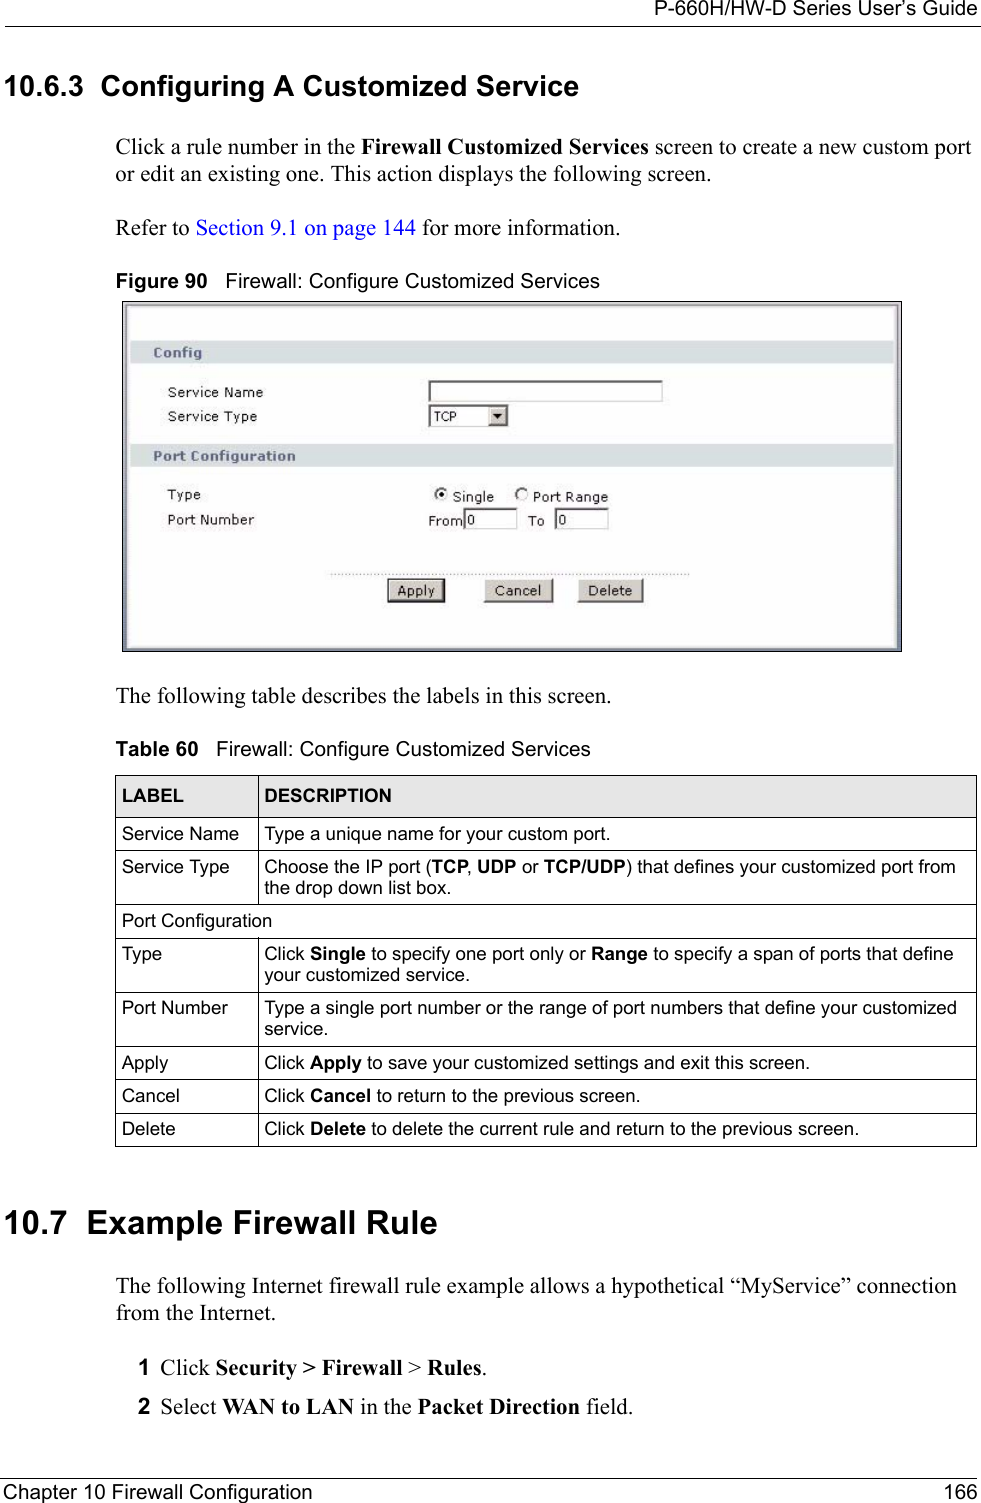 P-660H/HW-D Series User’s GuideChapter 10 Firewall Configuration 16610.6.3  Configuring A Customized Service  Click a rule number in the Firewall Customized Services screen to create a new custom port or edit an existing one. This action displays the following screen.Refer to Section 9.1 on page 144 for more information. Figure 90   Firewall: Configure Customized ServicesThe following table describes the labels in this screen.10.7  Example Firewall Rule The following Internet firewall rule example allows a hypothetical “MyService” connection from the Internet.1Click Security &gt; Firewall &gt; Rules.2Select WAN to LAN in the Packet Direction field. Table 60   Firewall: Configure Customized ServicesLABEL DESCRIPTIONService Name Type a unique name for your custom port.Service Type Choose the IP port (TCP, UDP or TCP/UDP) that defines your customized port from the drop down list box.Port ConfigurationType Click Single to specify one port only or Range to specify a span of ports that define your customized service. Port Number Type a single port number or the range of port numbers that define your customized service.Apply Click Apply to save your customized settings and exit this screen.Cancel Click Cancel to return to the previous screen.Delete Click Delete to delete the current rule and return to the previous screen.